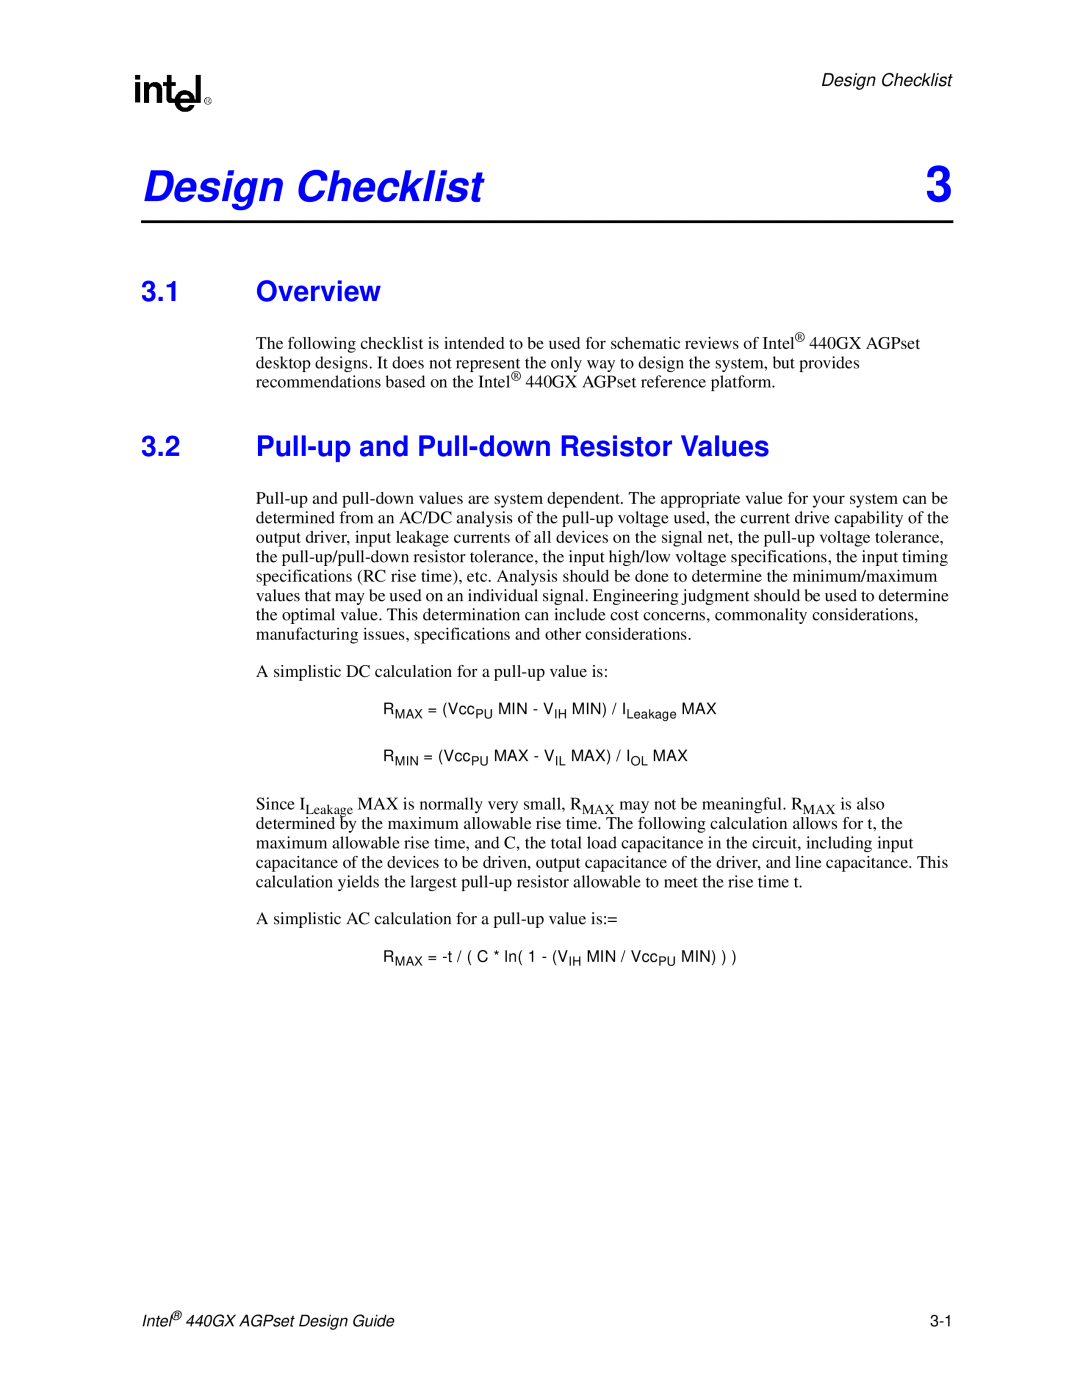 Intel 440GX manual Design Checklist, Overview, Pull-up and Pull-down Resistor Values 